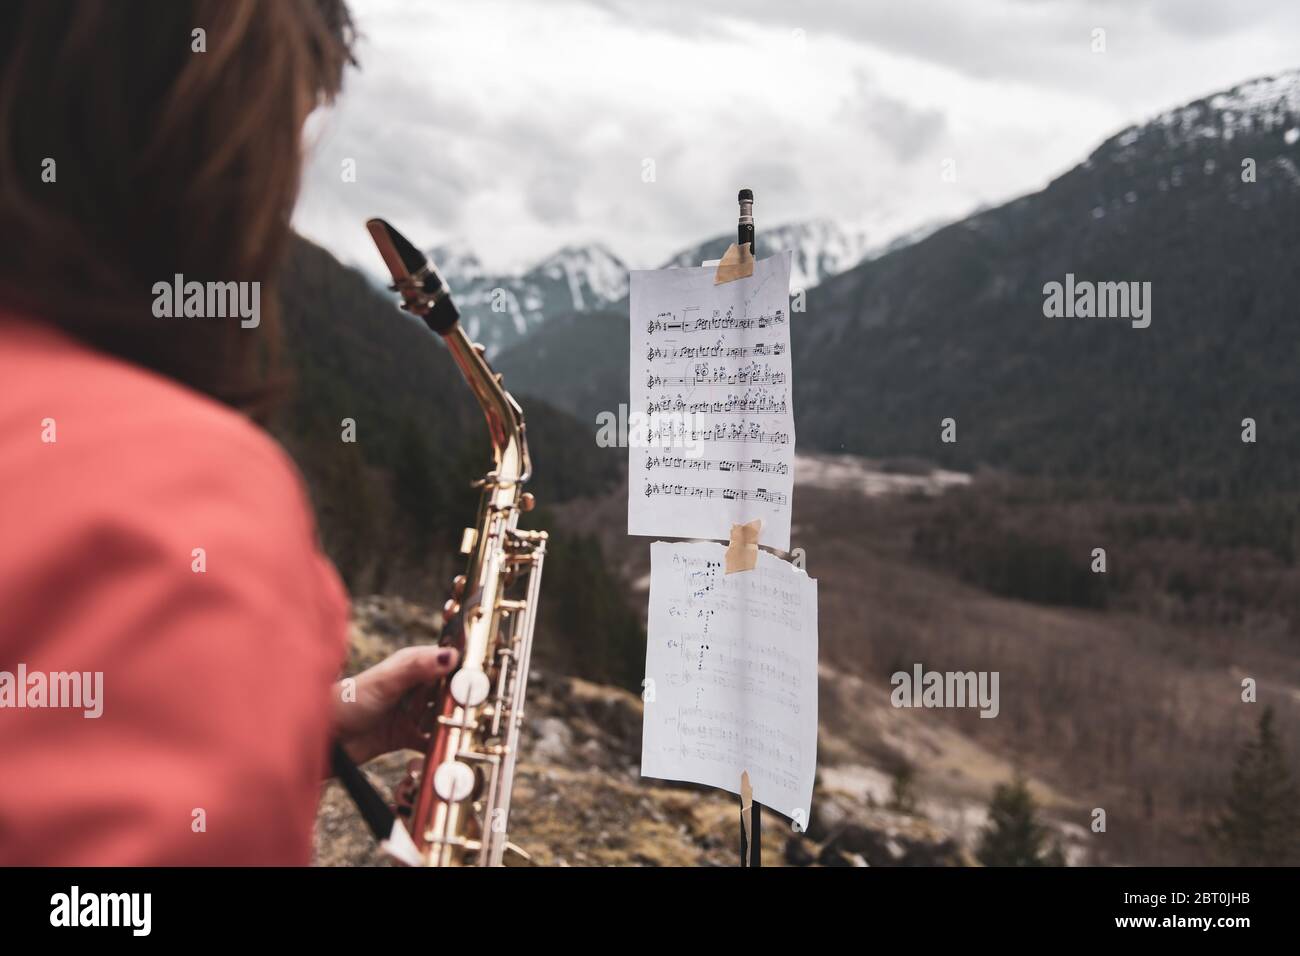 Woman standing on a mountain in the Squamish Valley, British Columbia, Canada, playing the saxophone. Stock Photo